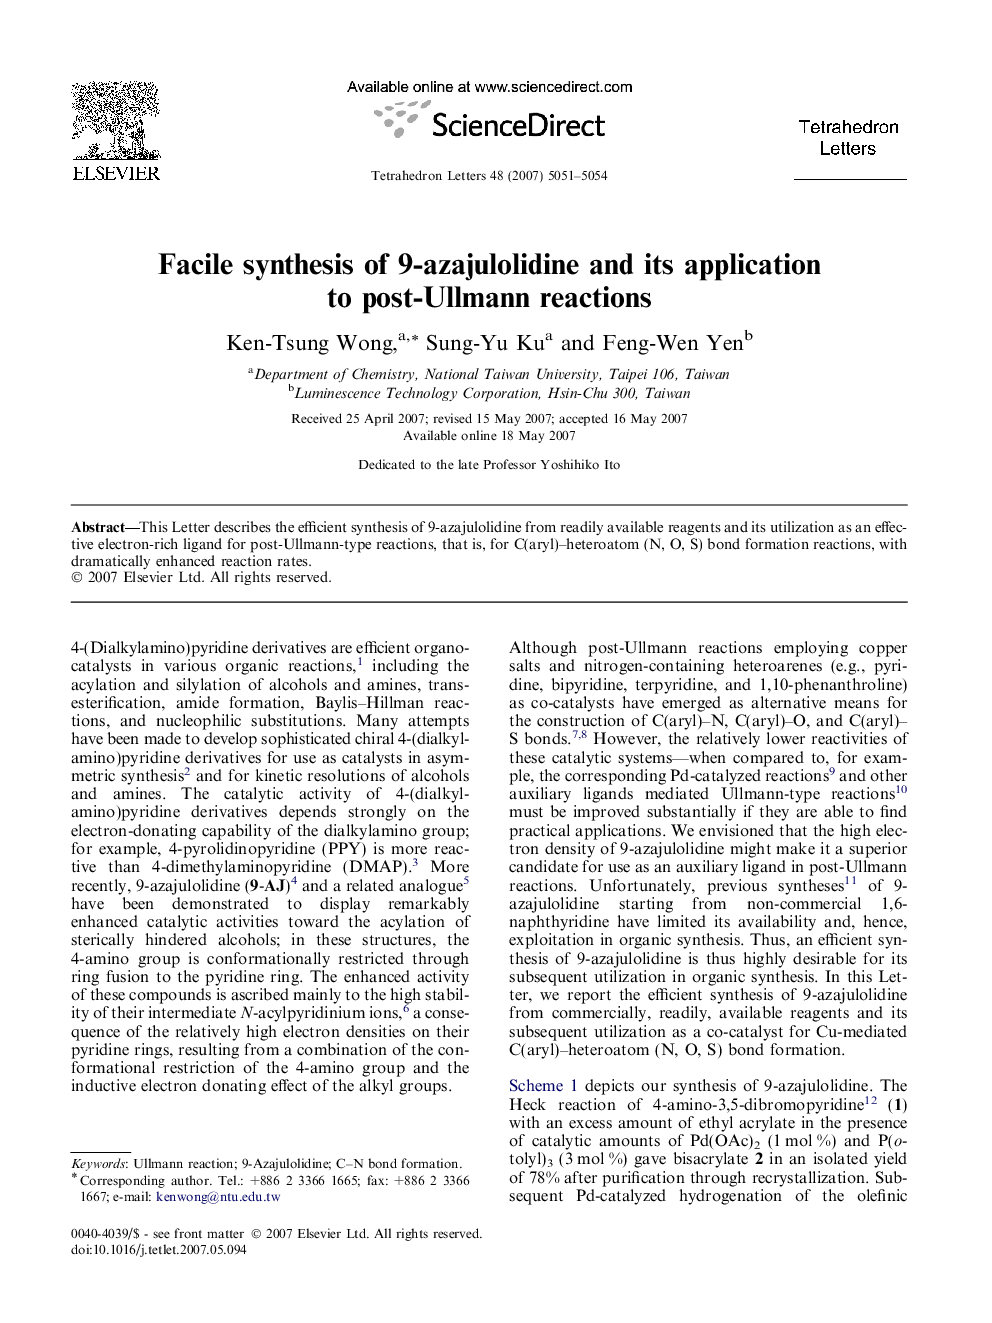 Facile synthesis of 9-azajulolidine and its application to post-Ullmann reactions